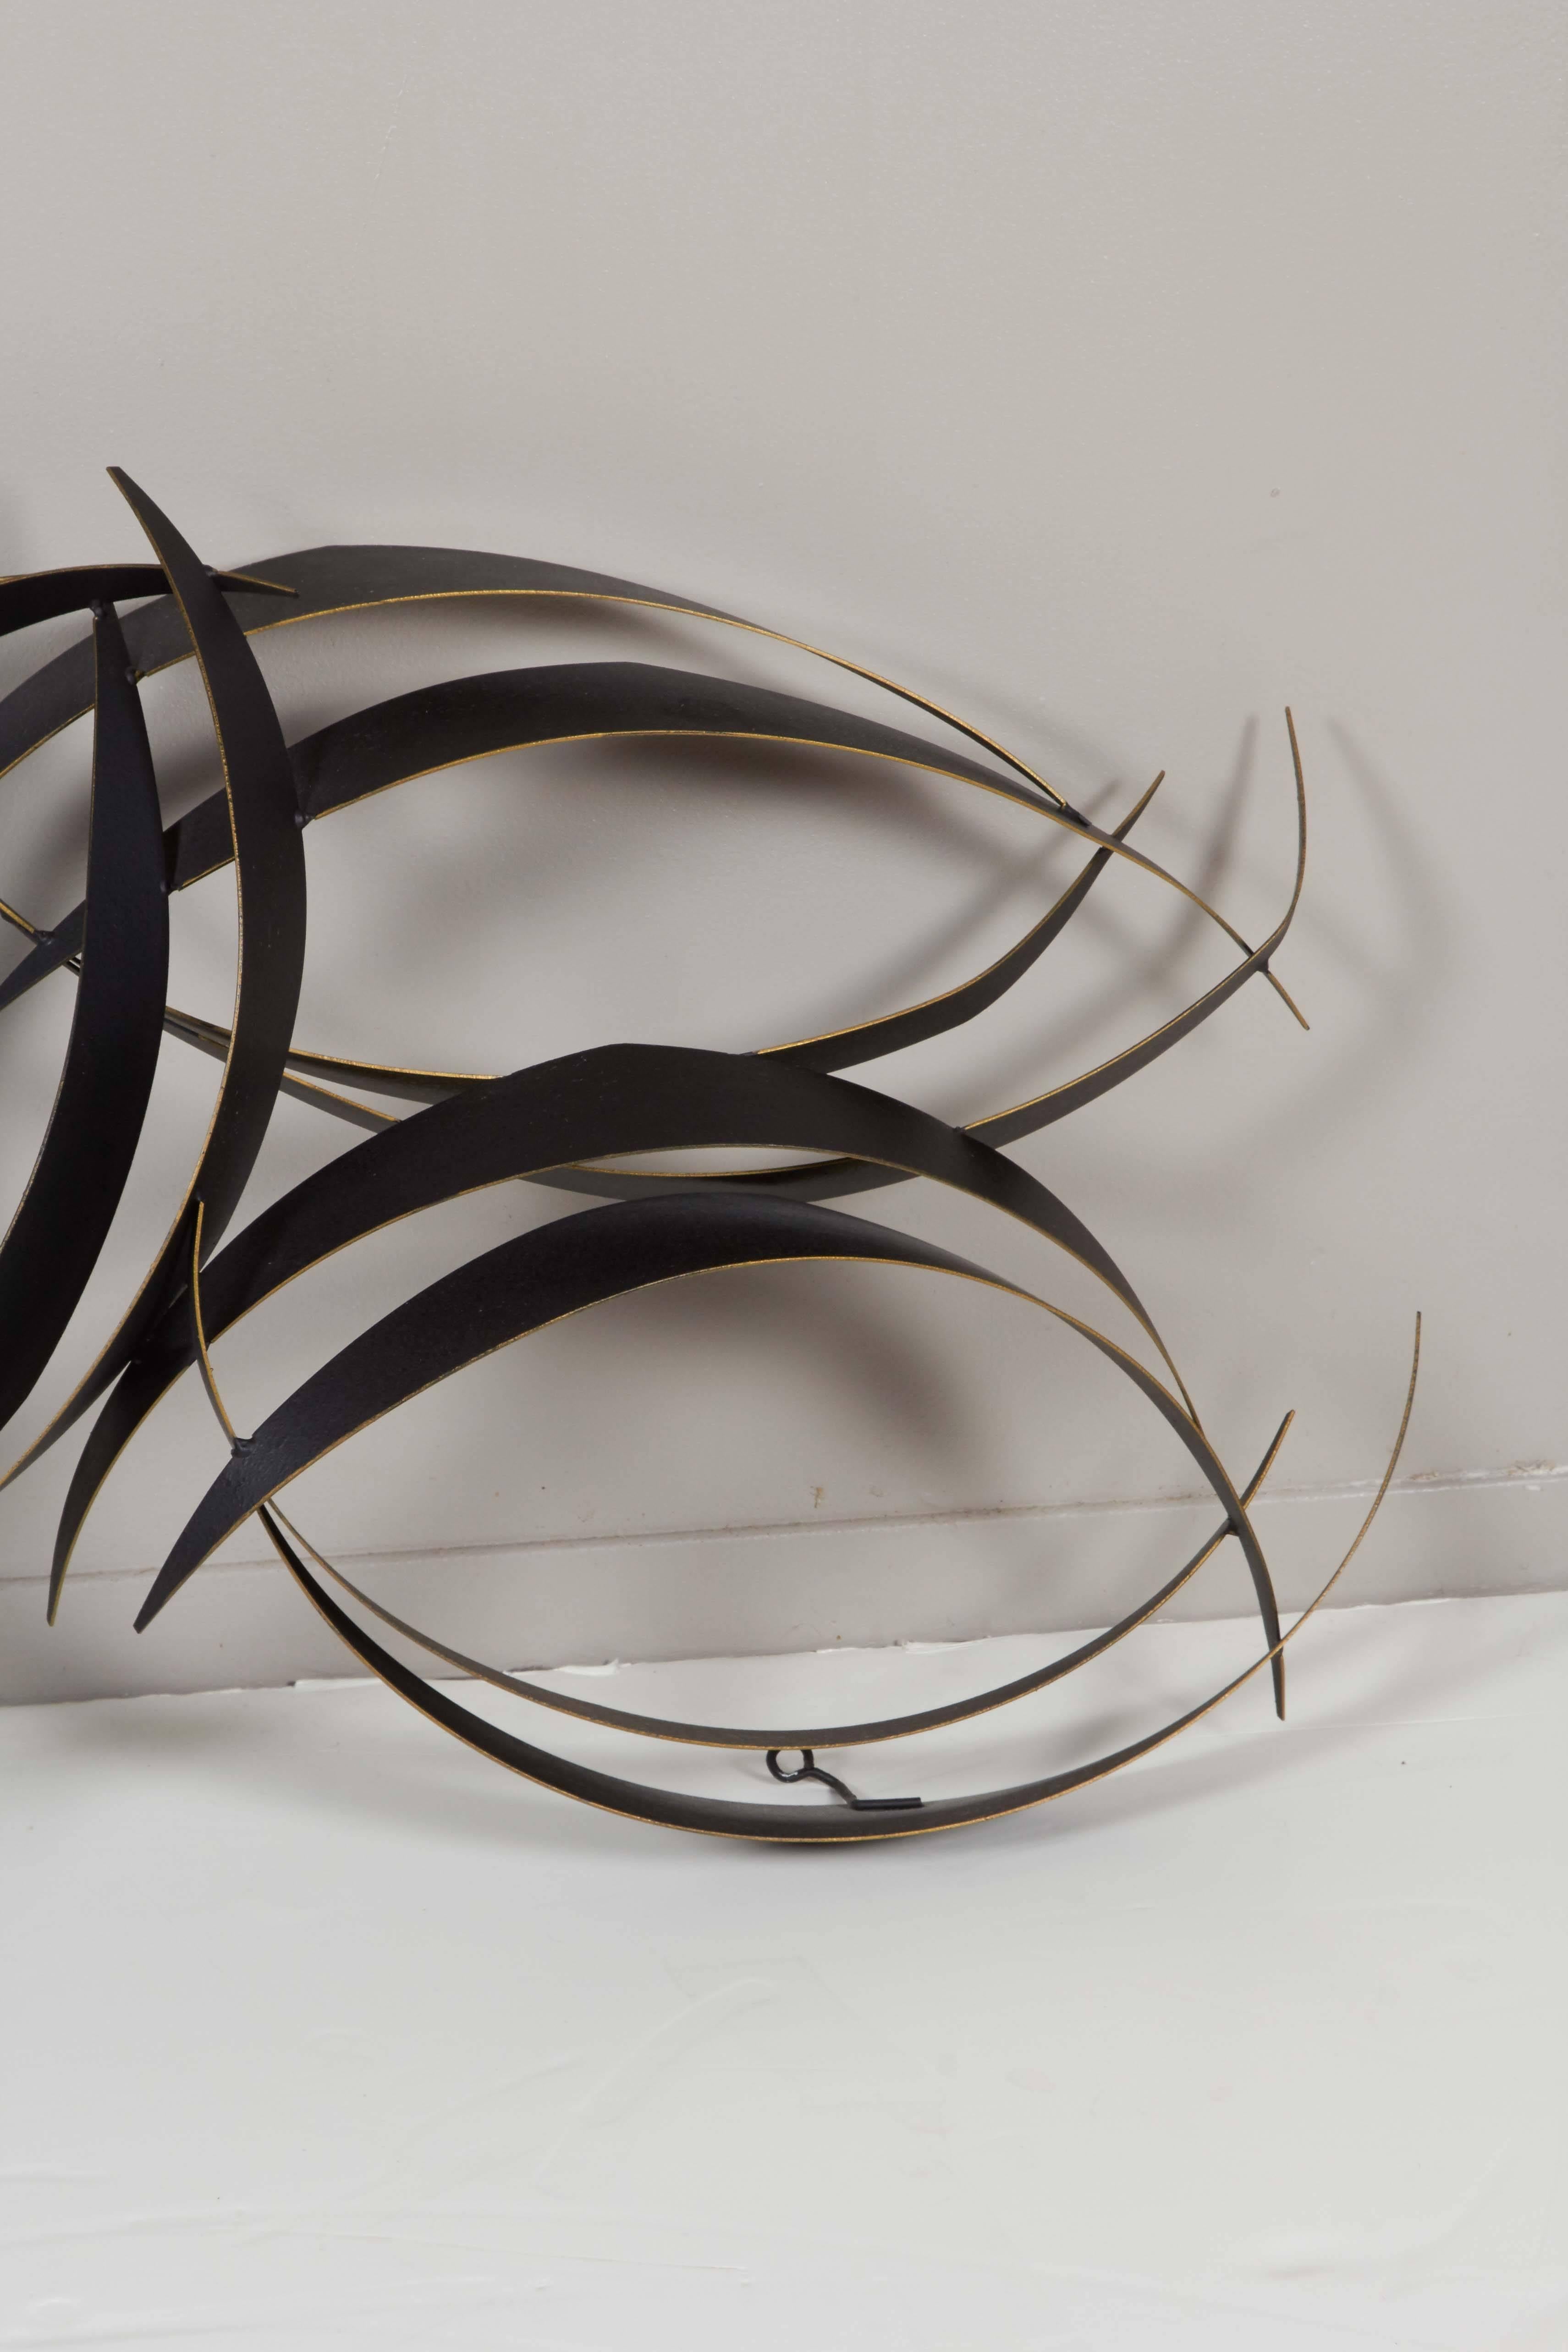 A hanging wall sculpture by Curtis Jere, comprised of sheets of curved metal, with gold to the edges. Signed [© C. Jere 1997]. Very good condition, consistent with age and use.